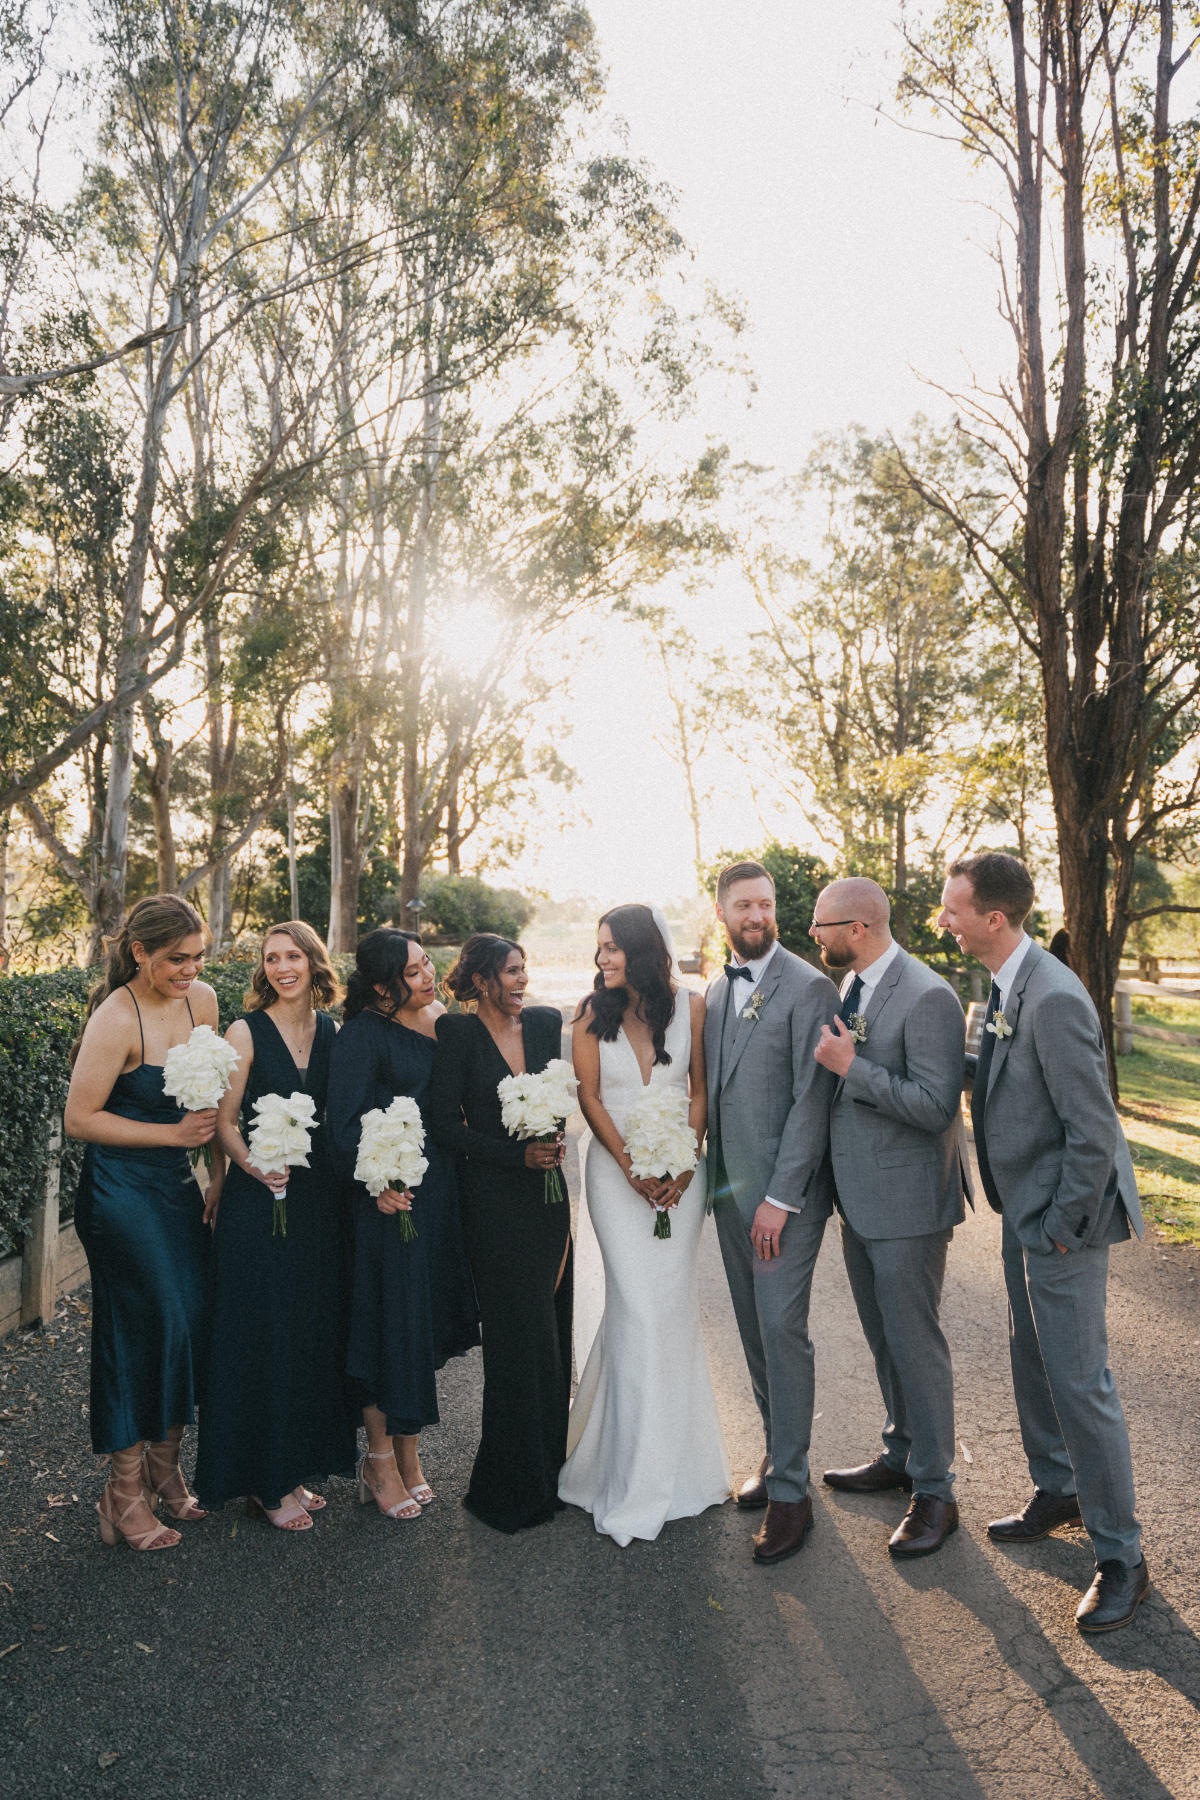 Tamburlaine wedding for Jess and Alex. Photographed by Zac Graham Photography.